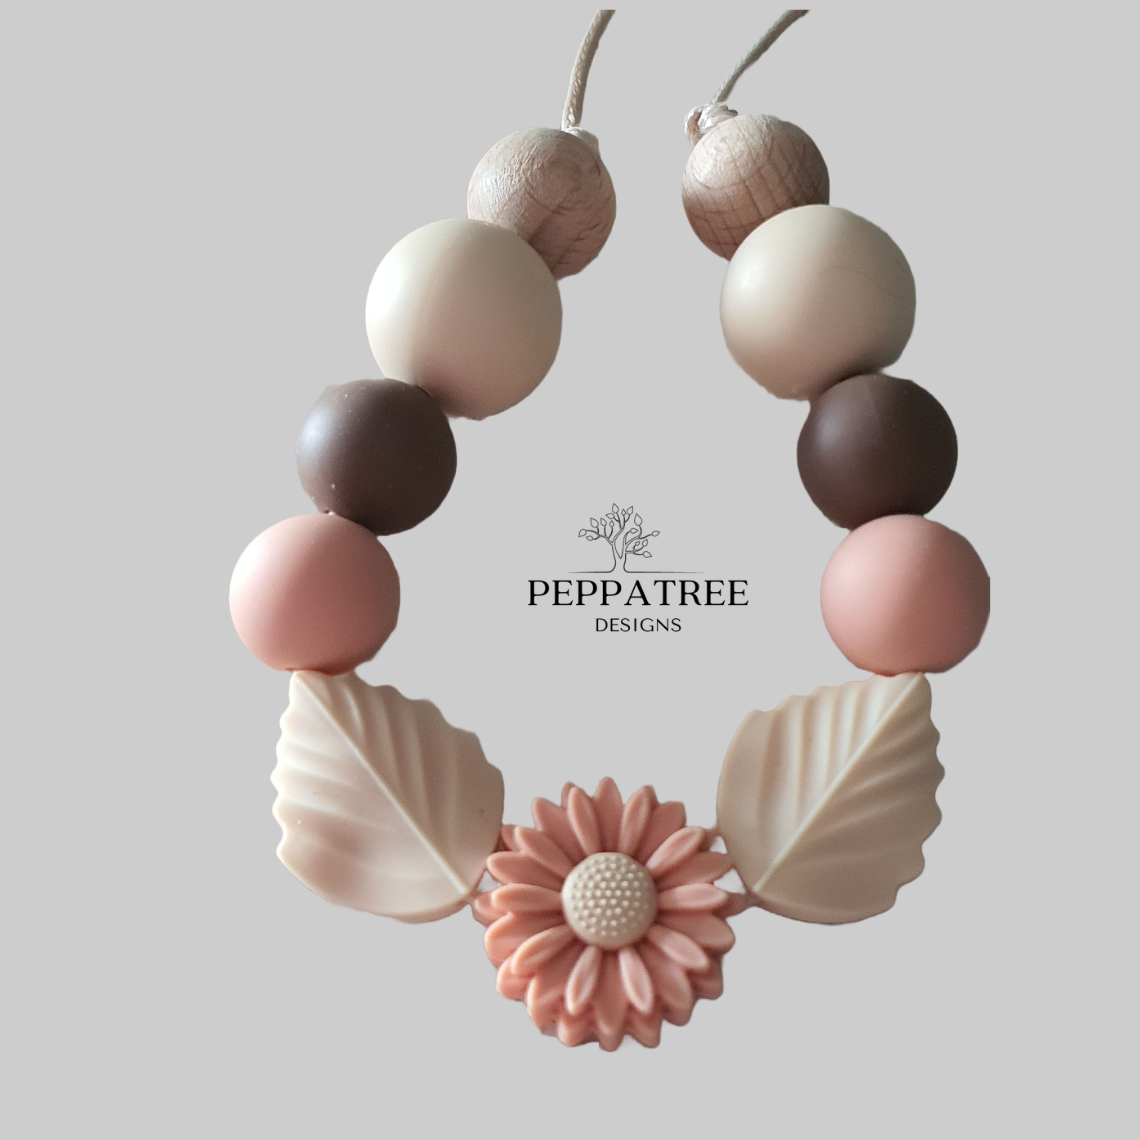 Daisy and Leaf Silicone Bead Necklace in Cream, Peach and Cocoa Brown | Handmade Necklace